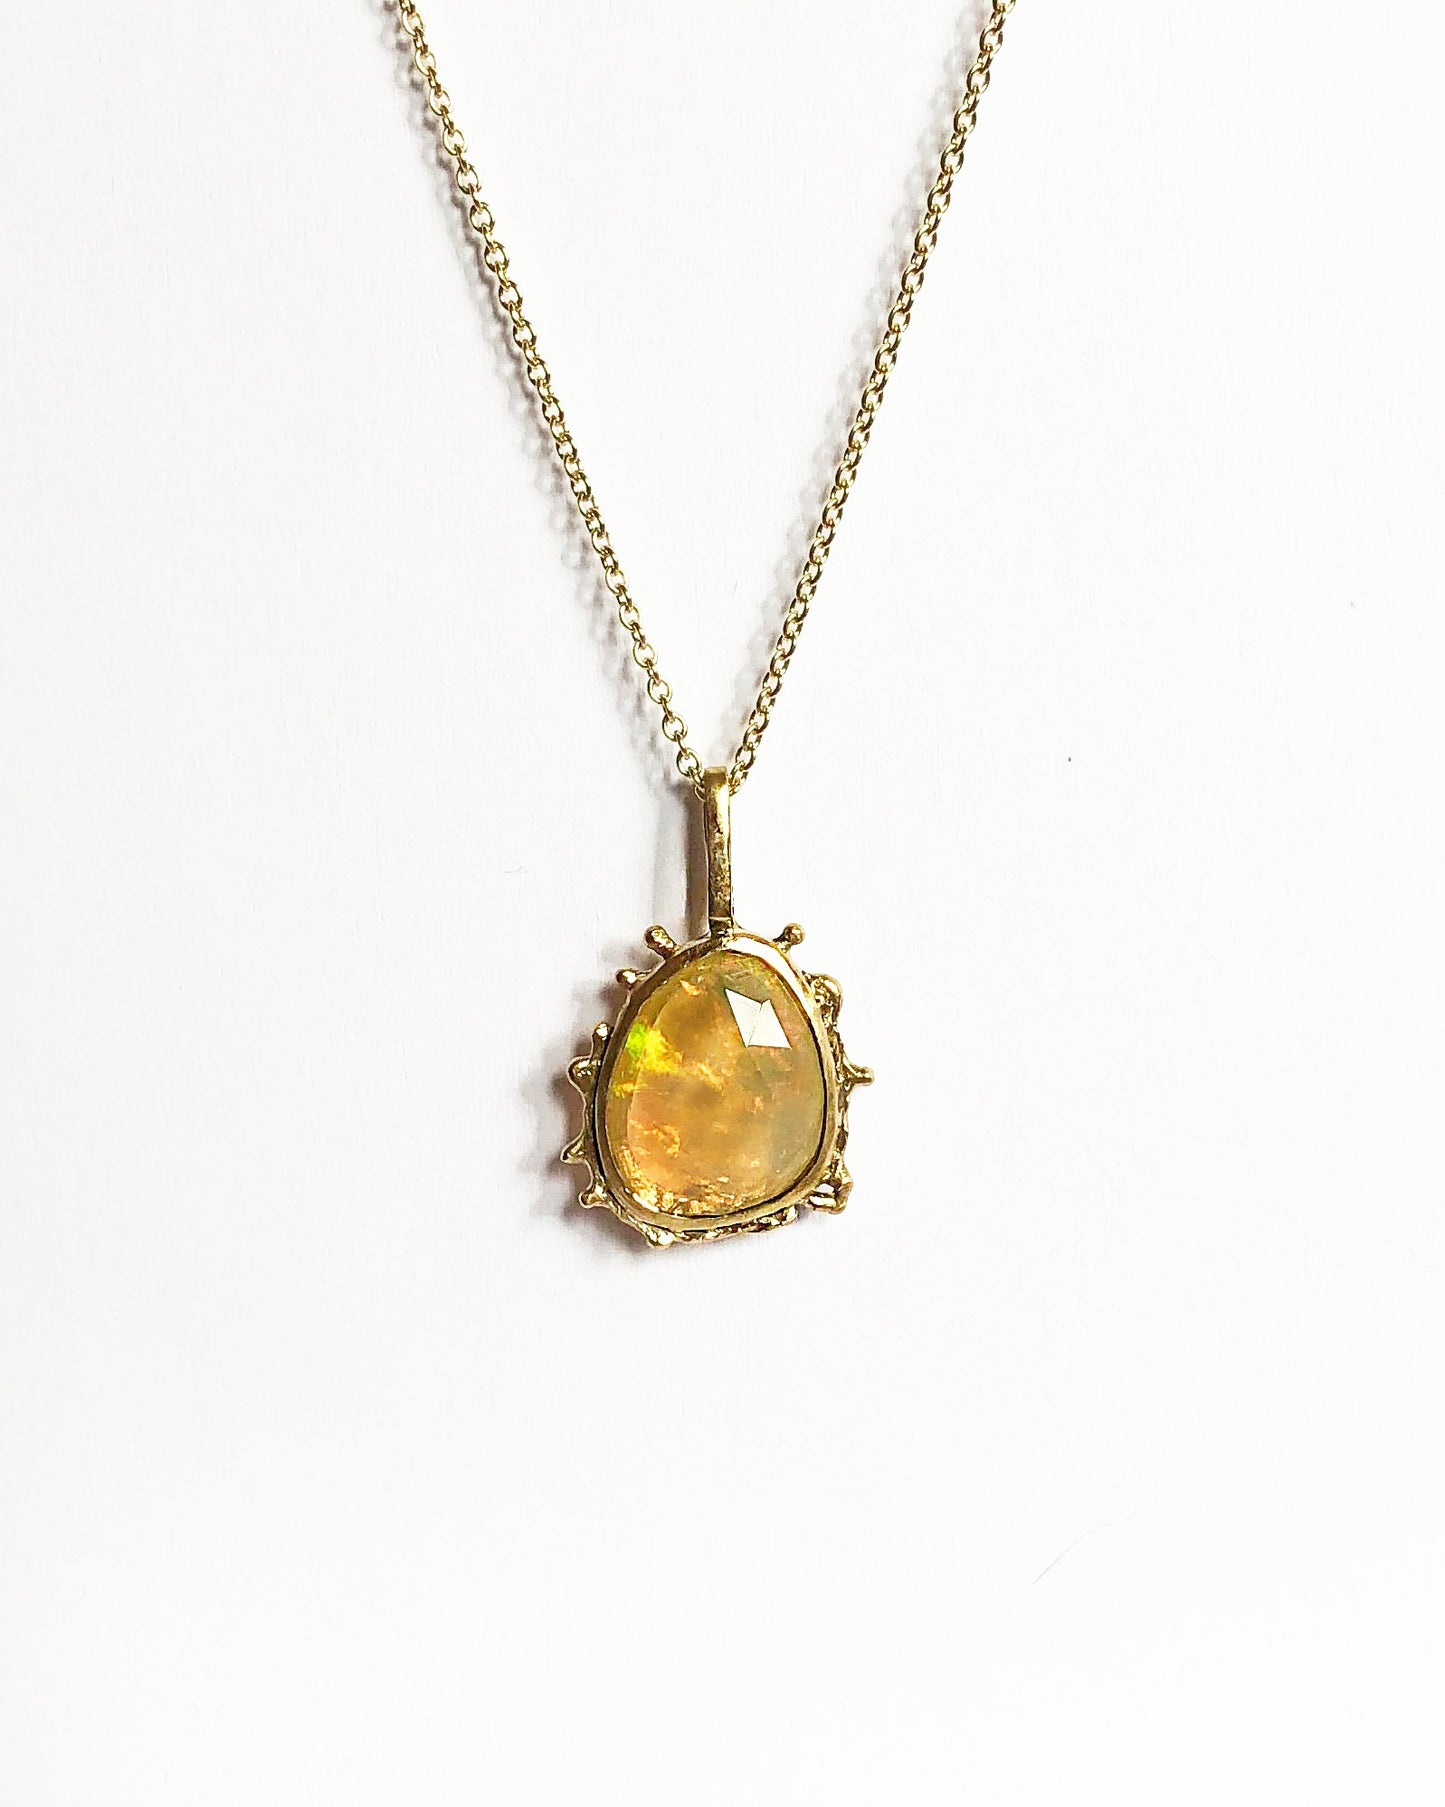 Fairmined gold pendant with opal / RAY